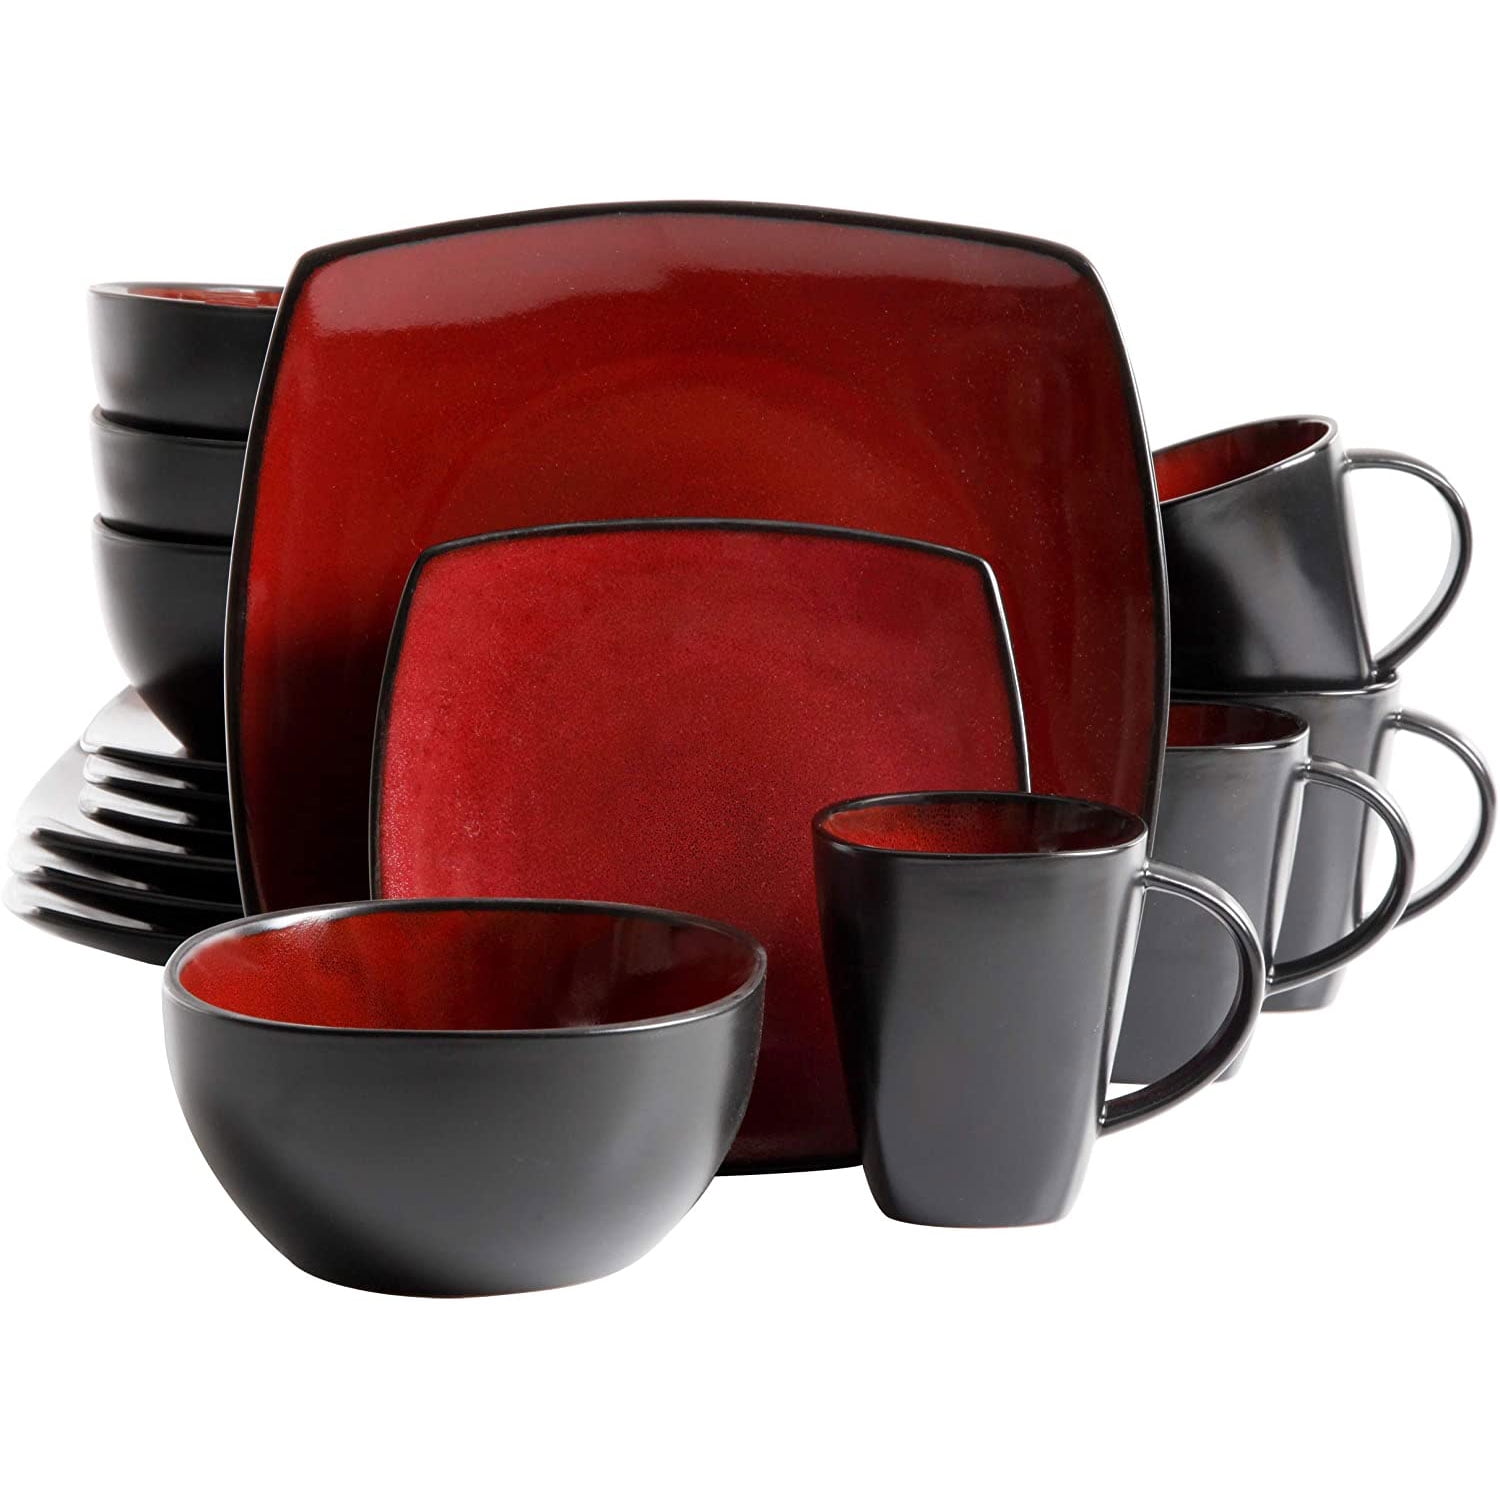 Gibson Soho Lounge Square 16-Piece Dinnerware Set - Red - image 1 of 11